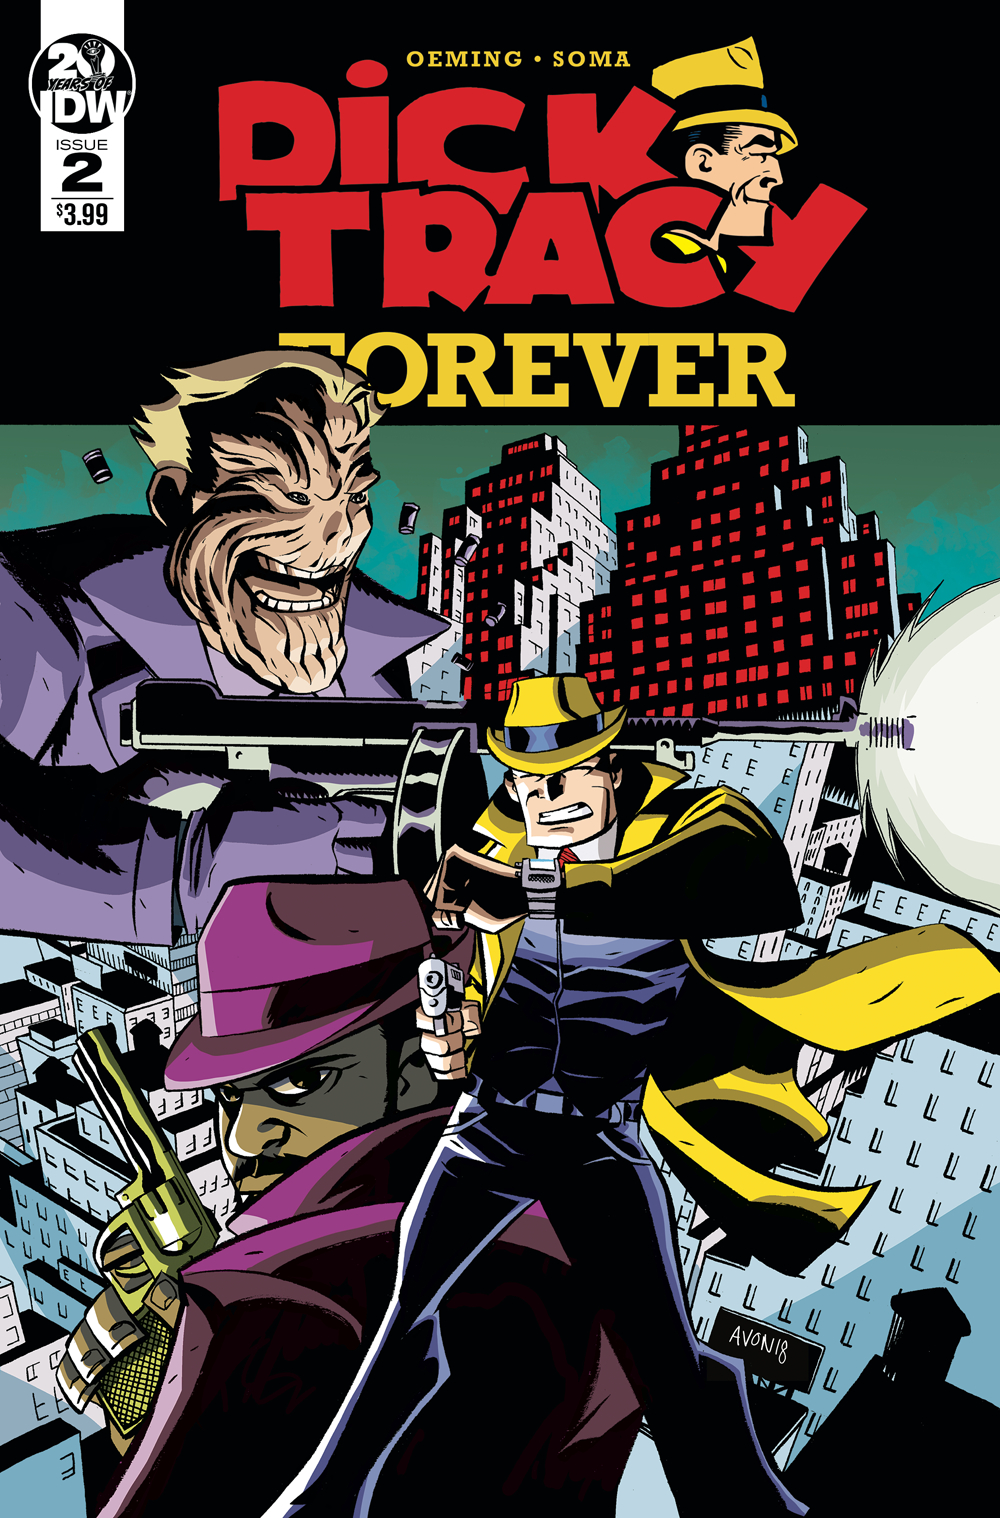 Dick Tracy: Forever no. 2 (2019 Series)